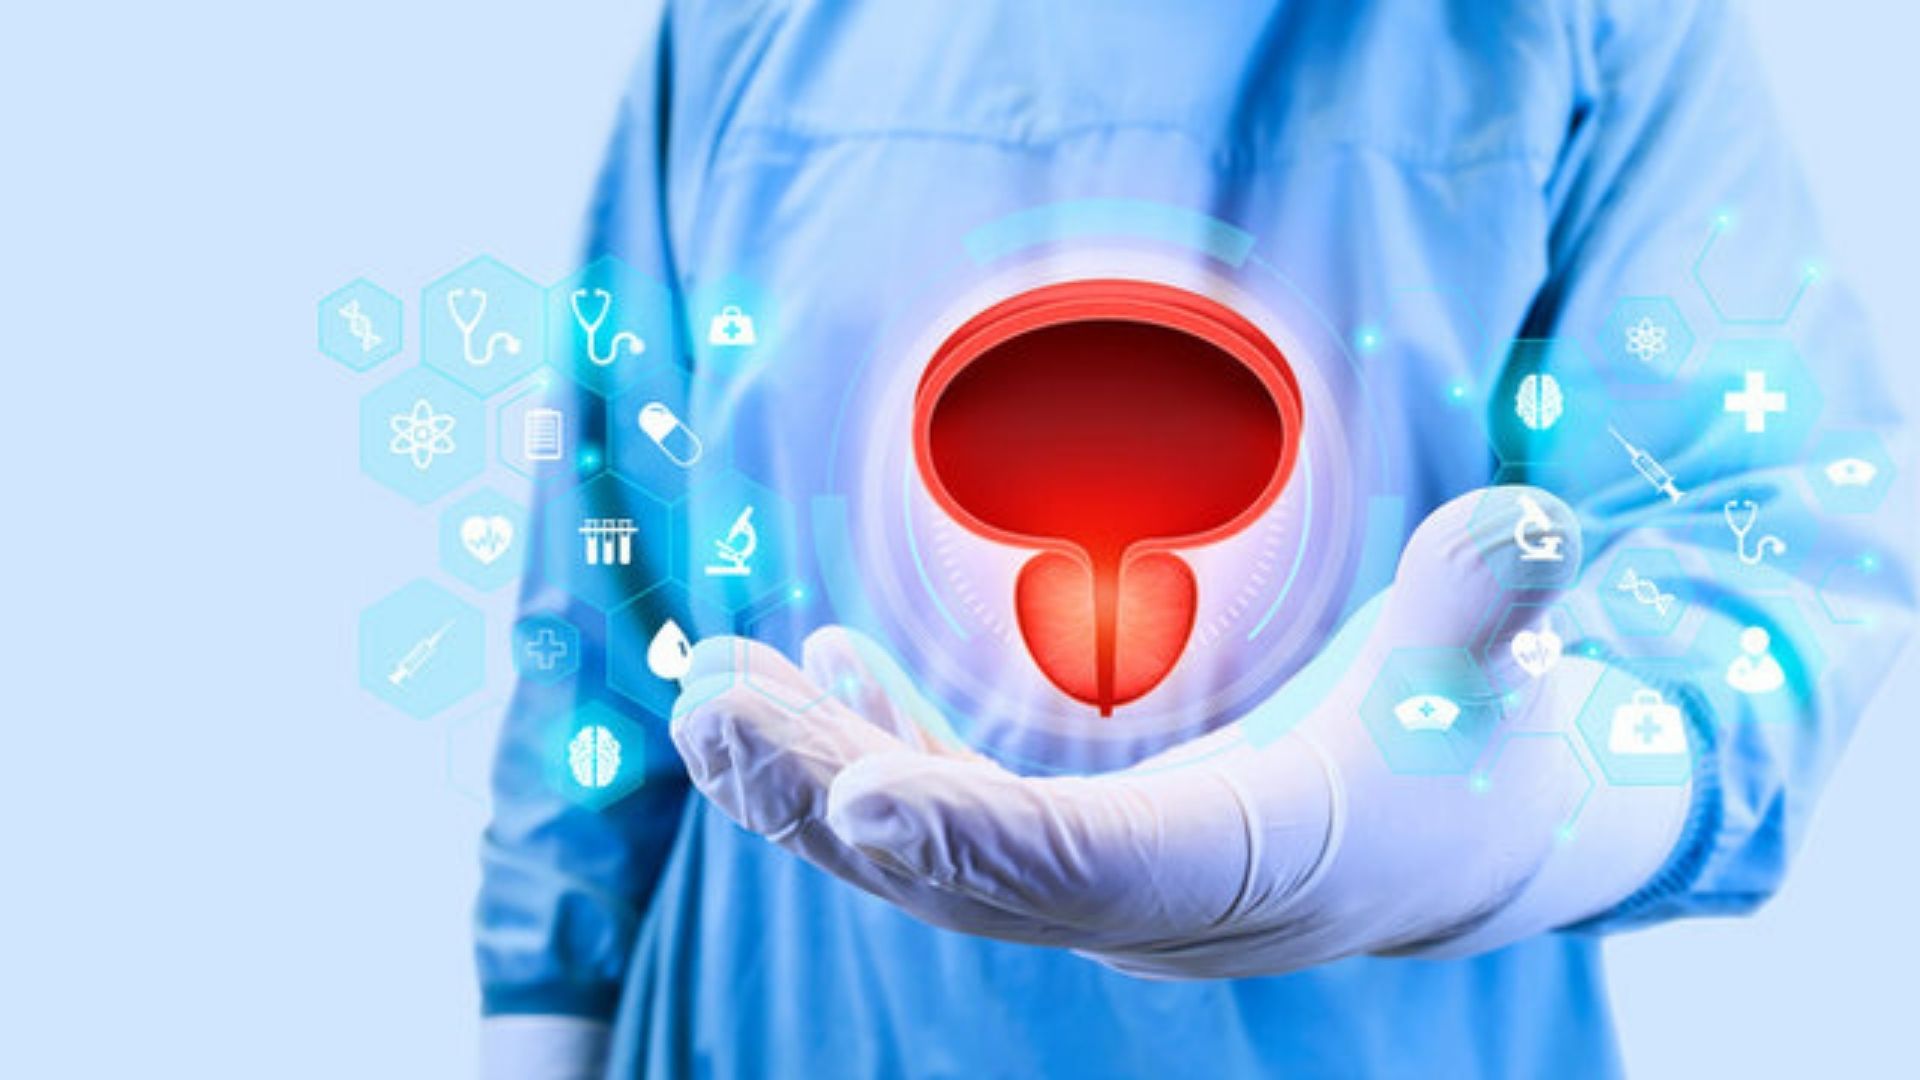 Enlarged Prostate: Causes, Symptoms, And Treatments